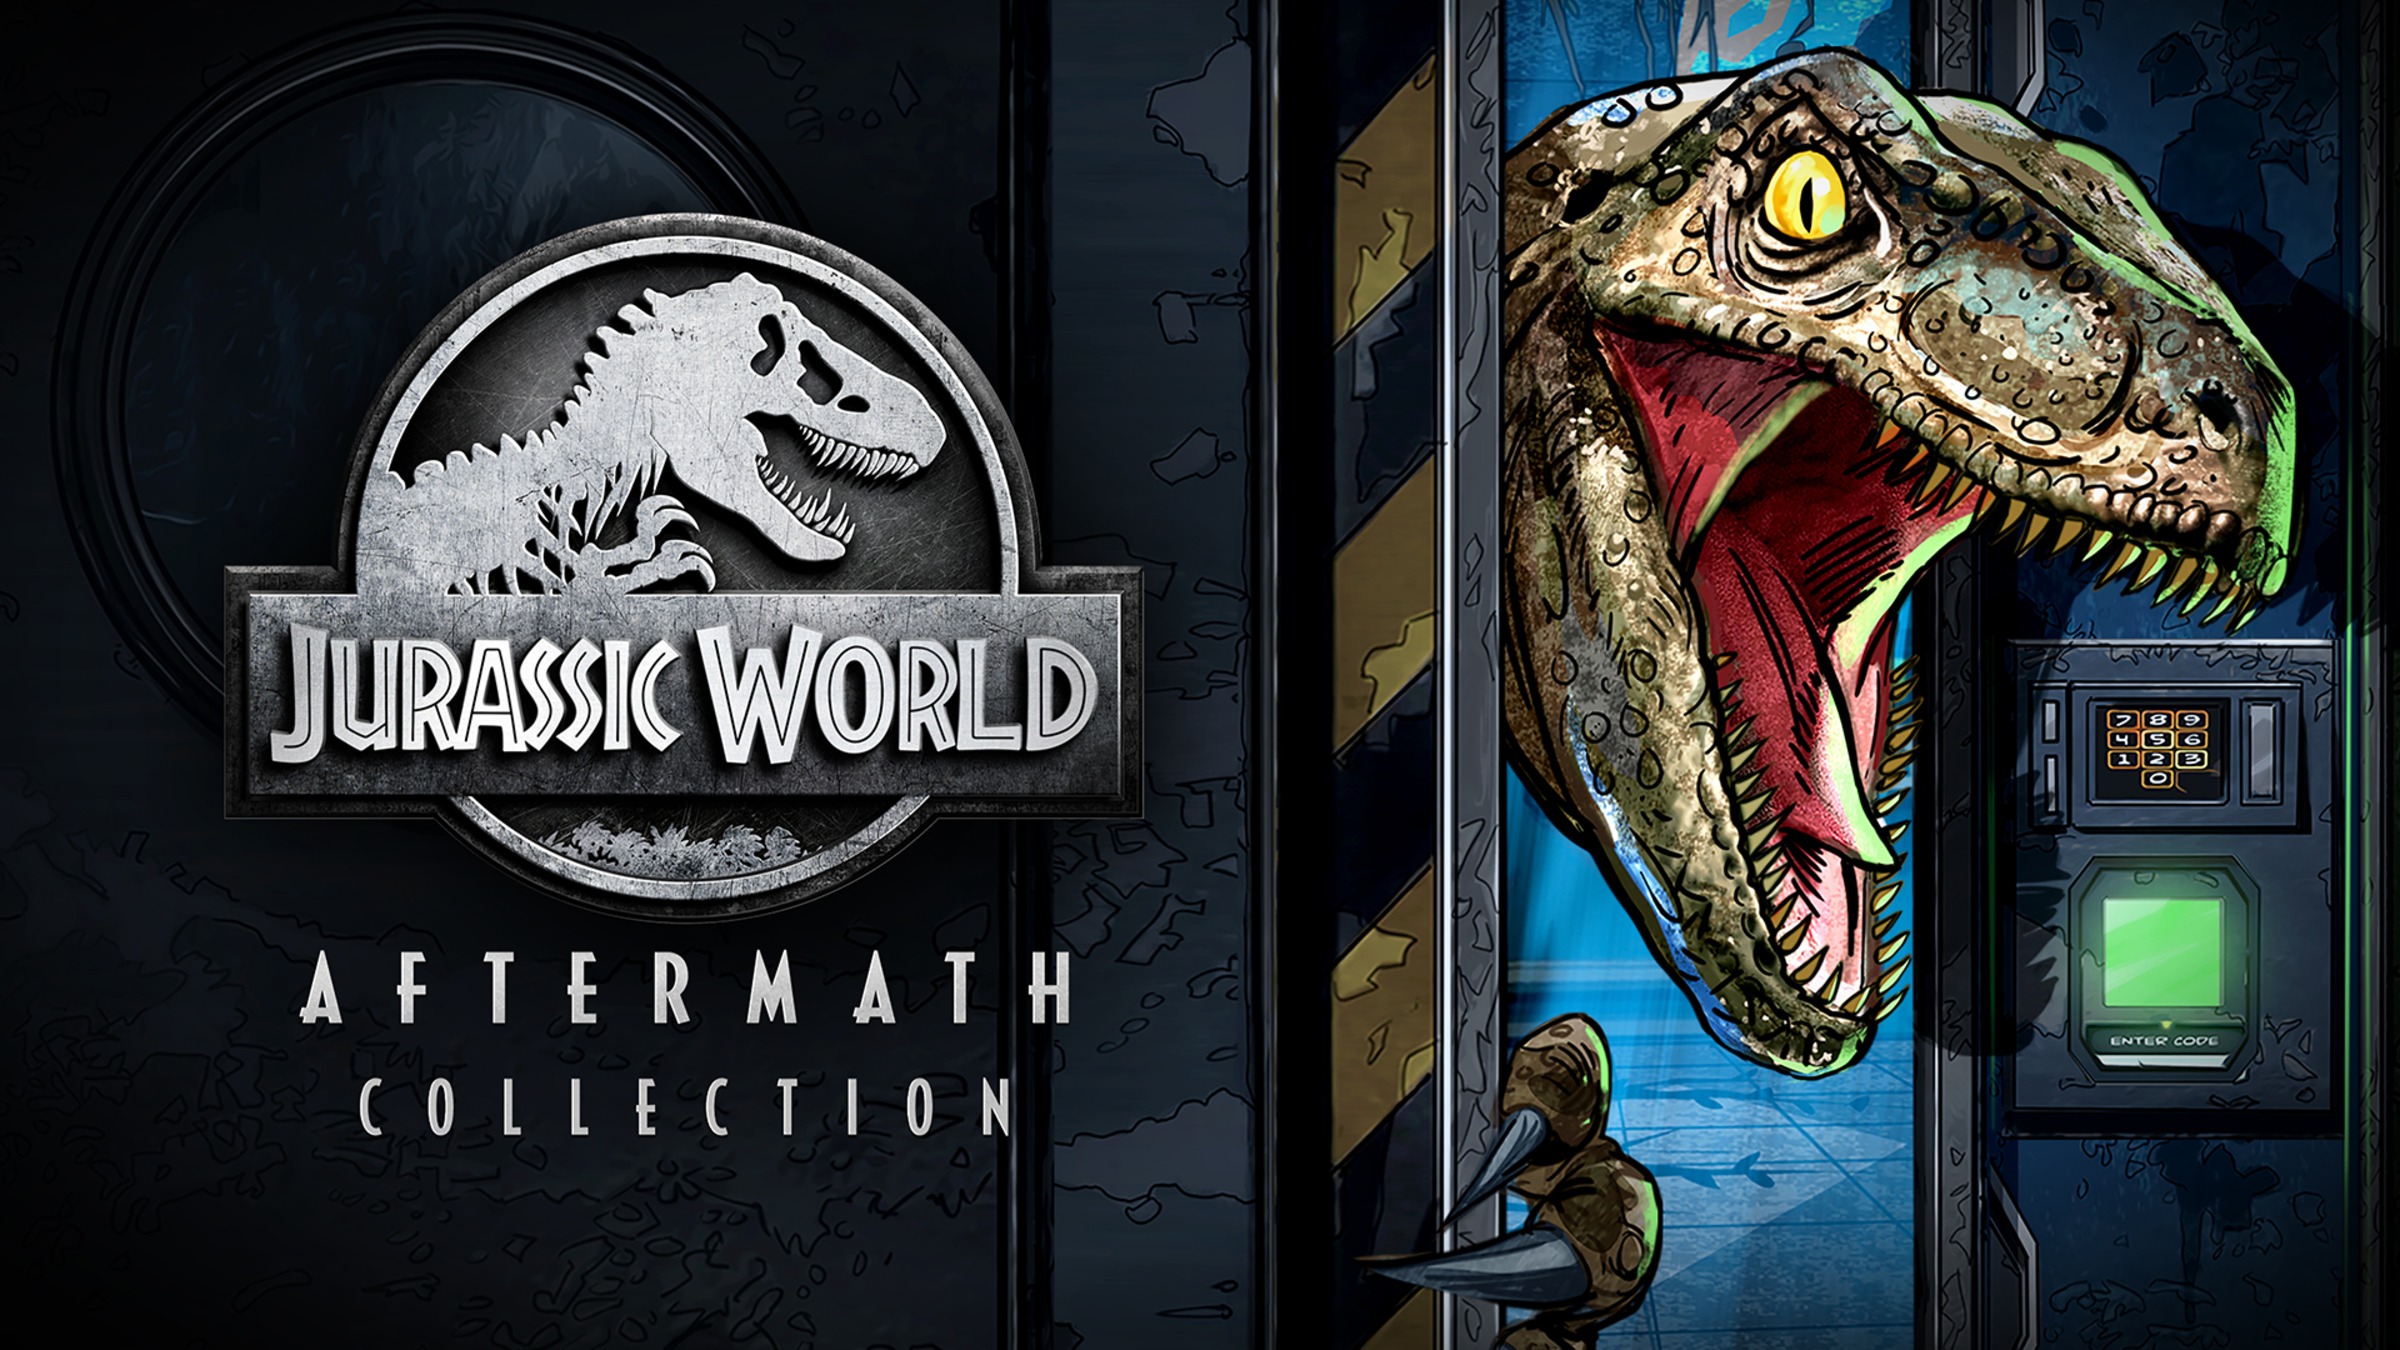 Jurassic World Aftermath for Nintendo Switch - Nintendo Official Site